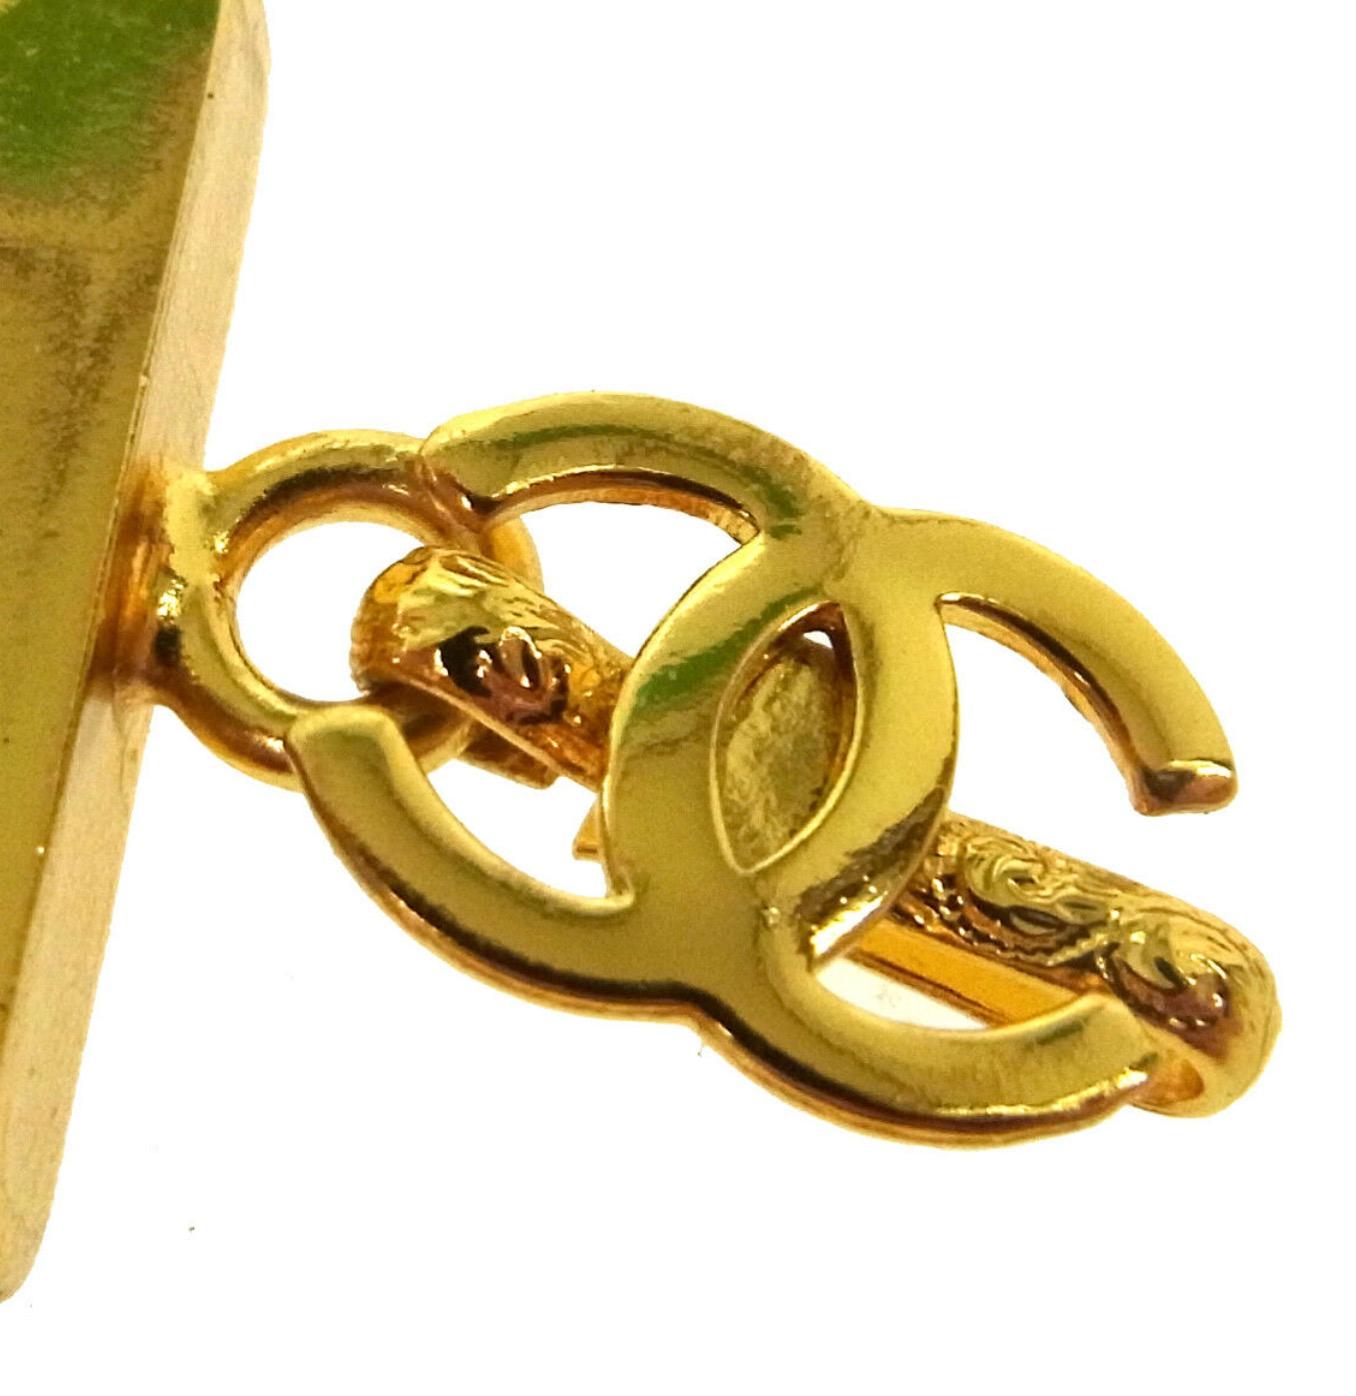 Metal
Gold tone
Lobster claw closure
Charm measures 0.75